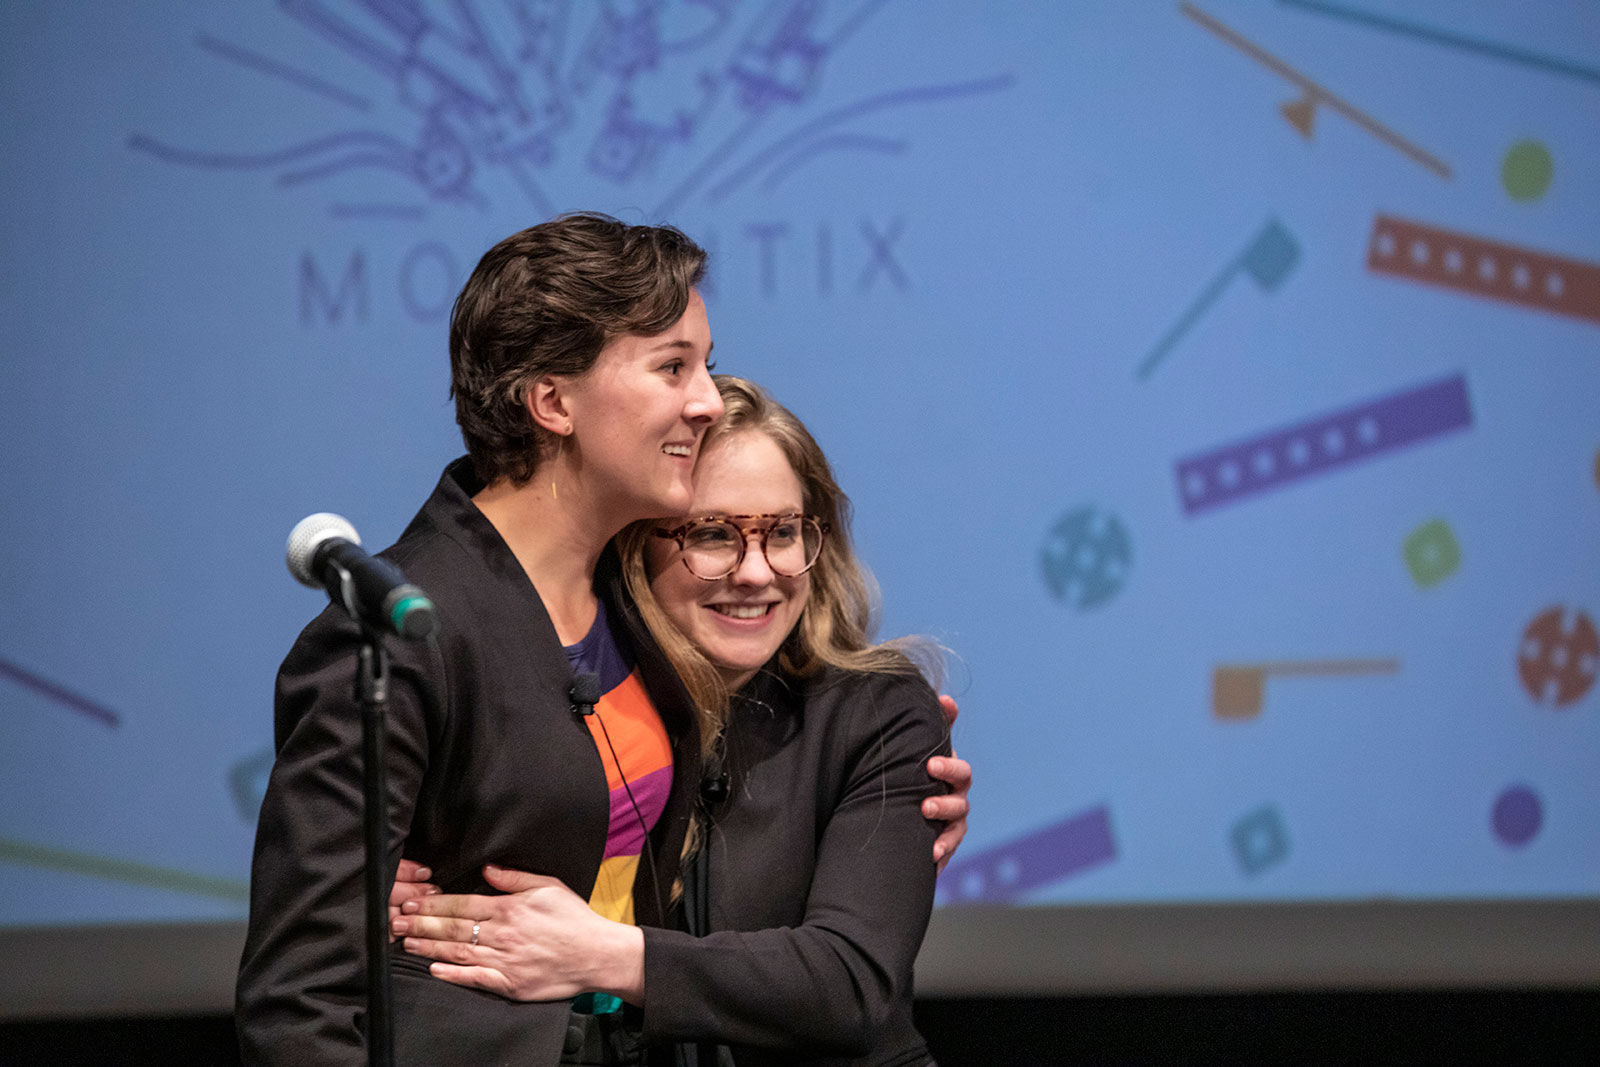 Pictured: Alana Aamodt '18 and Anna Gilbertson '19 Four teams competed in the final round of the Big Idea, a startup competition hosted by Innovation @ CC on Feb. 7m 2019 in Celeste Theater. The competing teams were SaFire, Advanced Water Sensing, Momentix and Infinite Chemistry. The teams competed for $25,000. First place went to Momentix while Advanced Water Sensing took second place. <span class="cc-gallery-credit"></span>